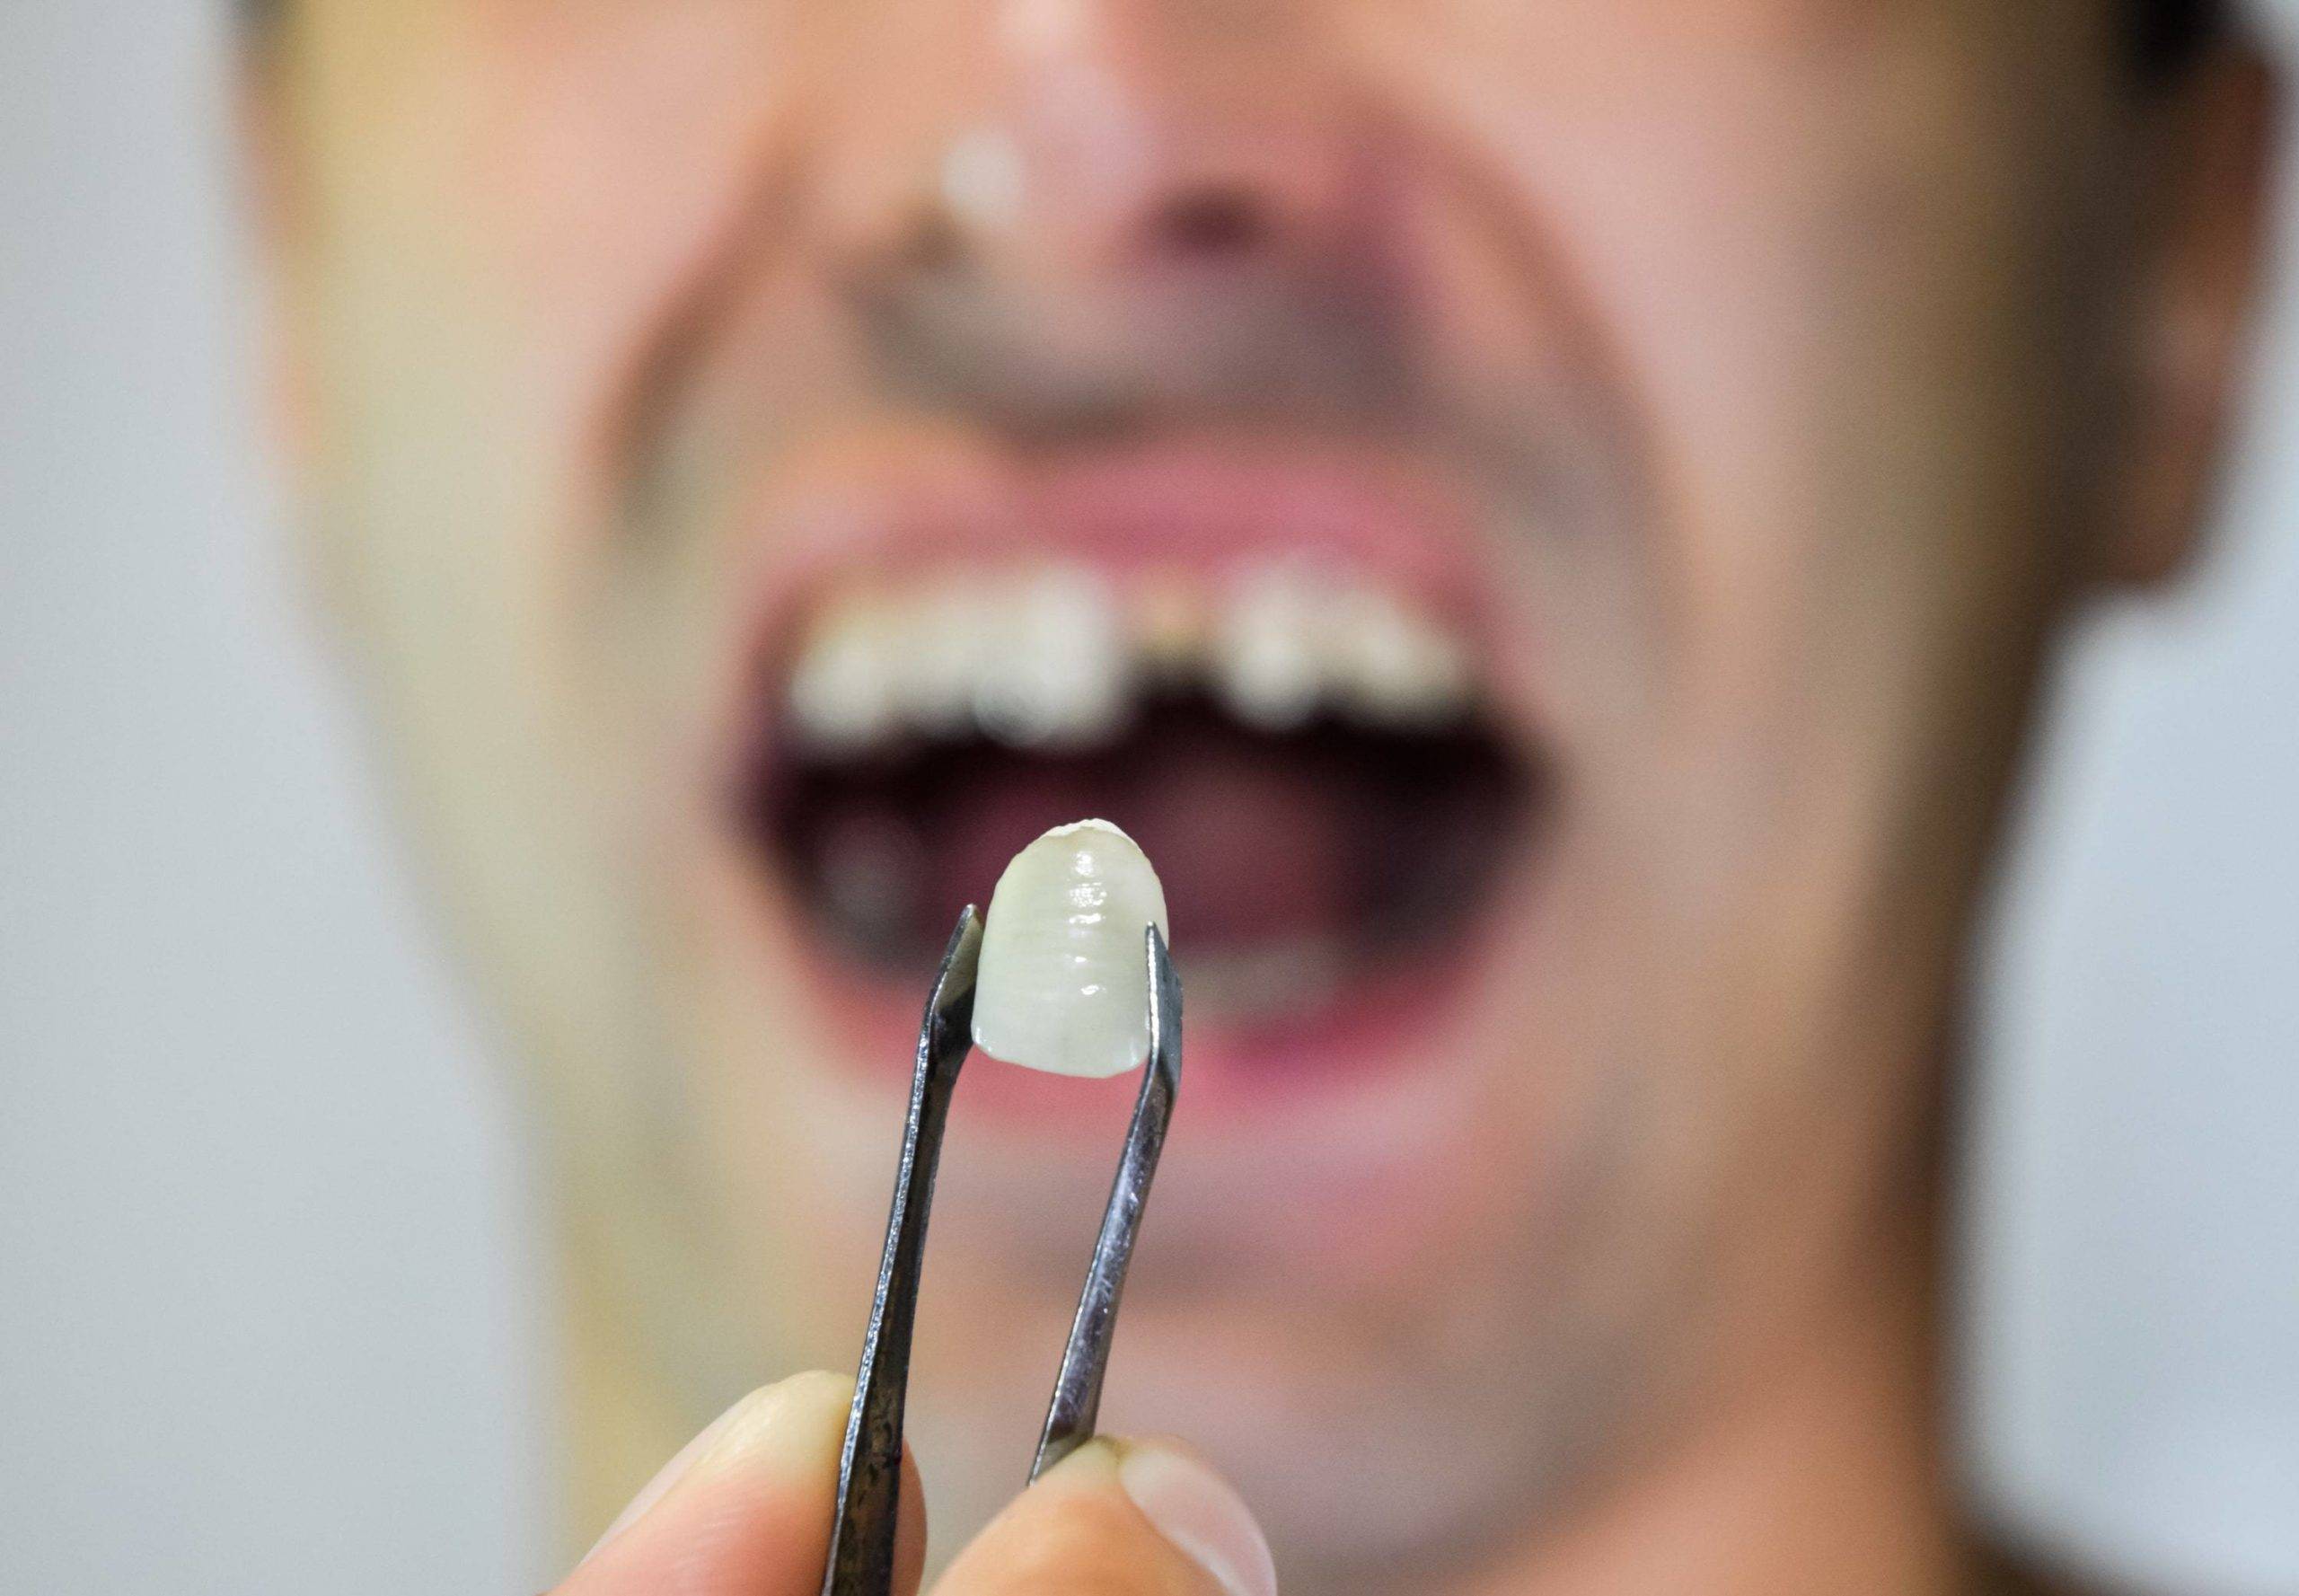 The Best Treatment To Replace Missing Teeth